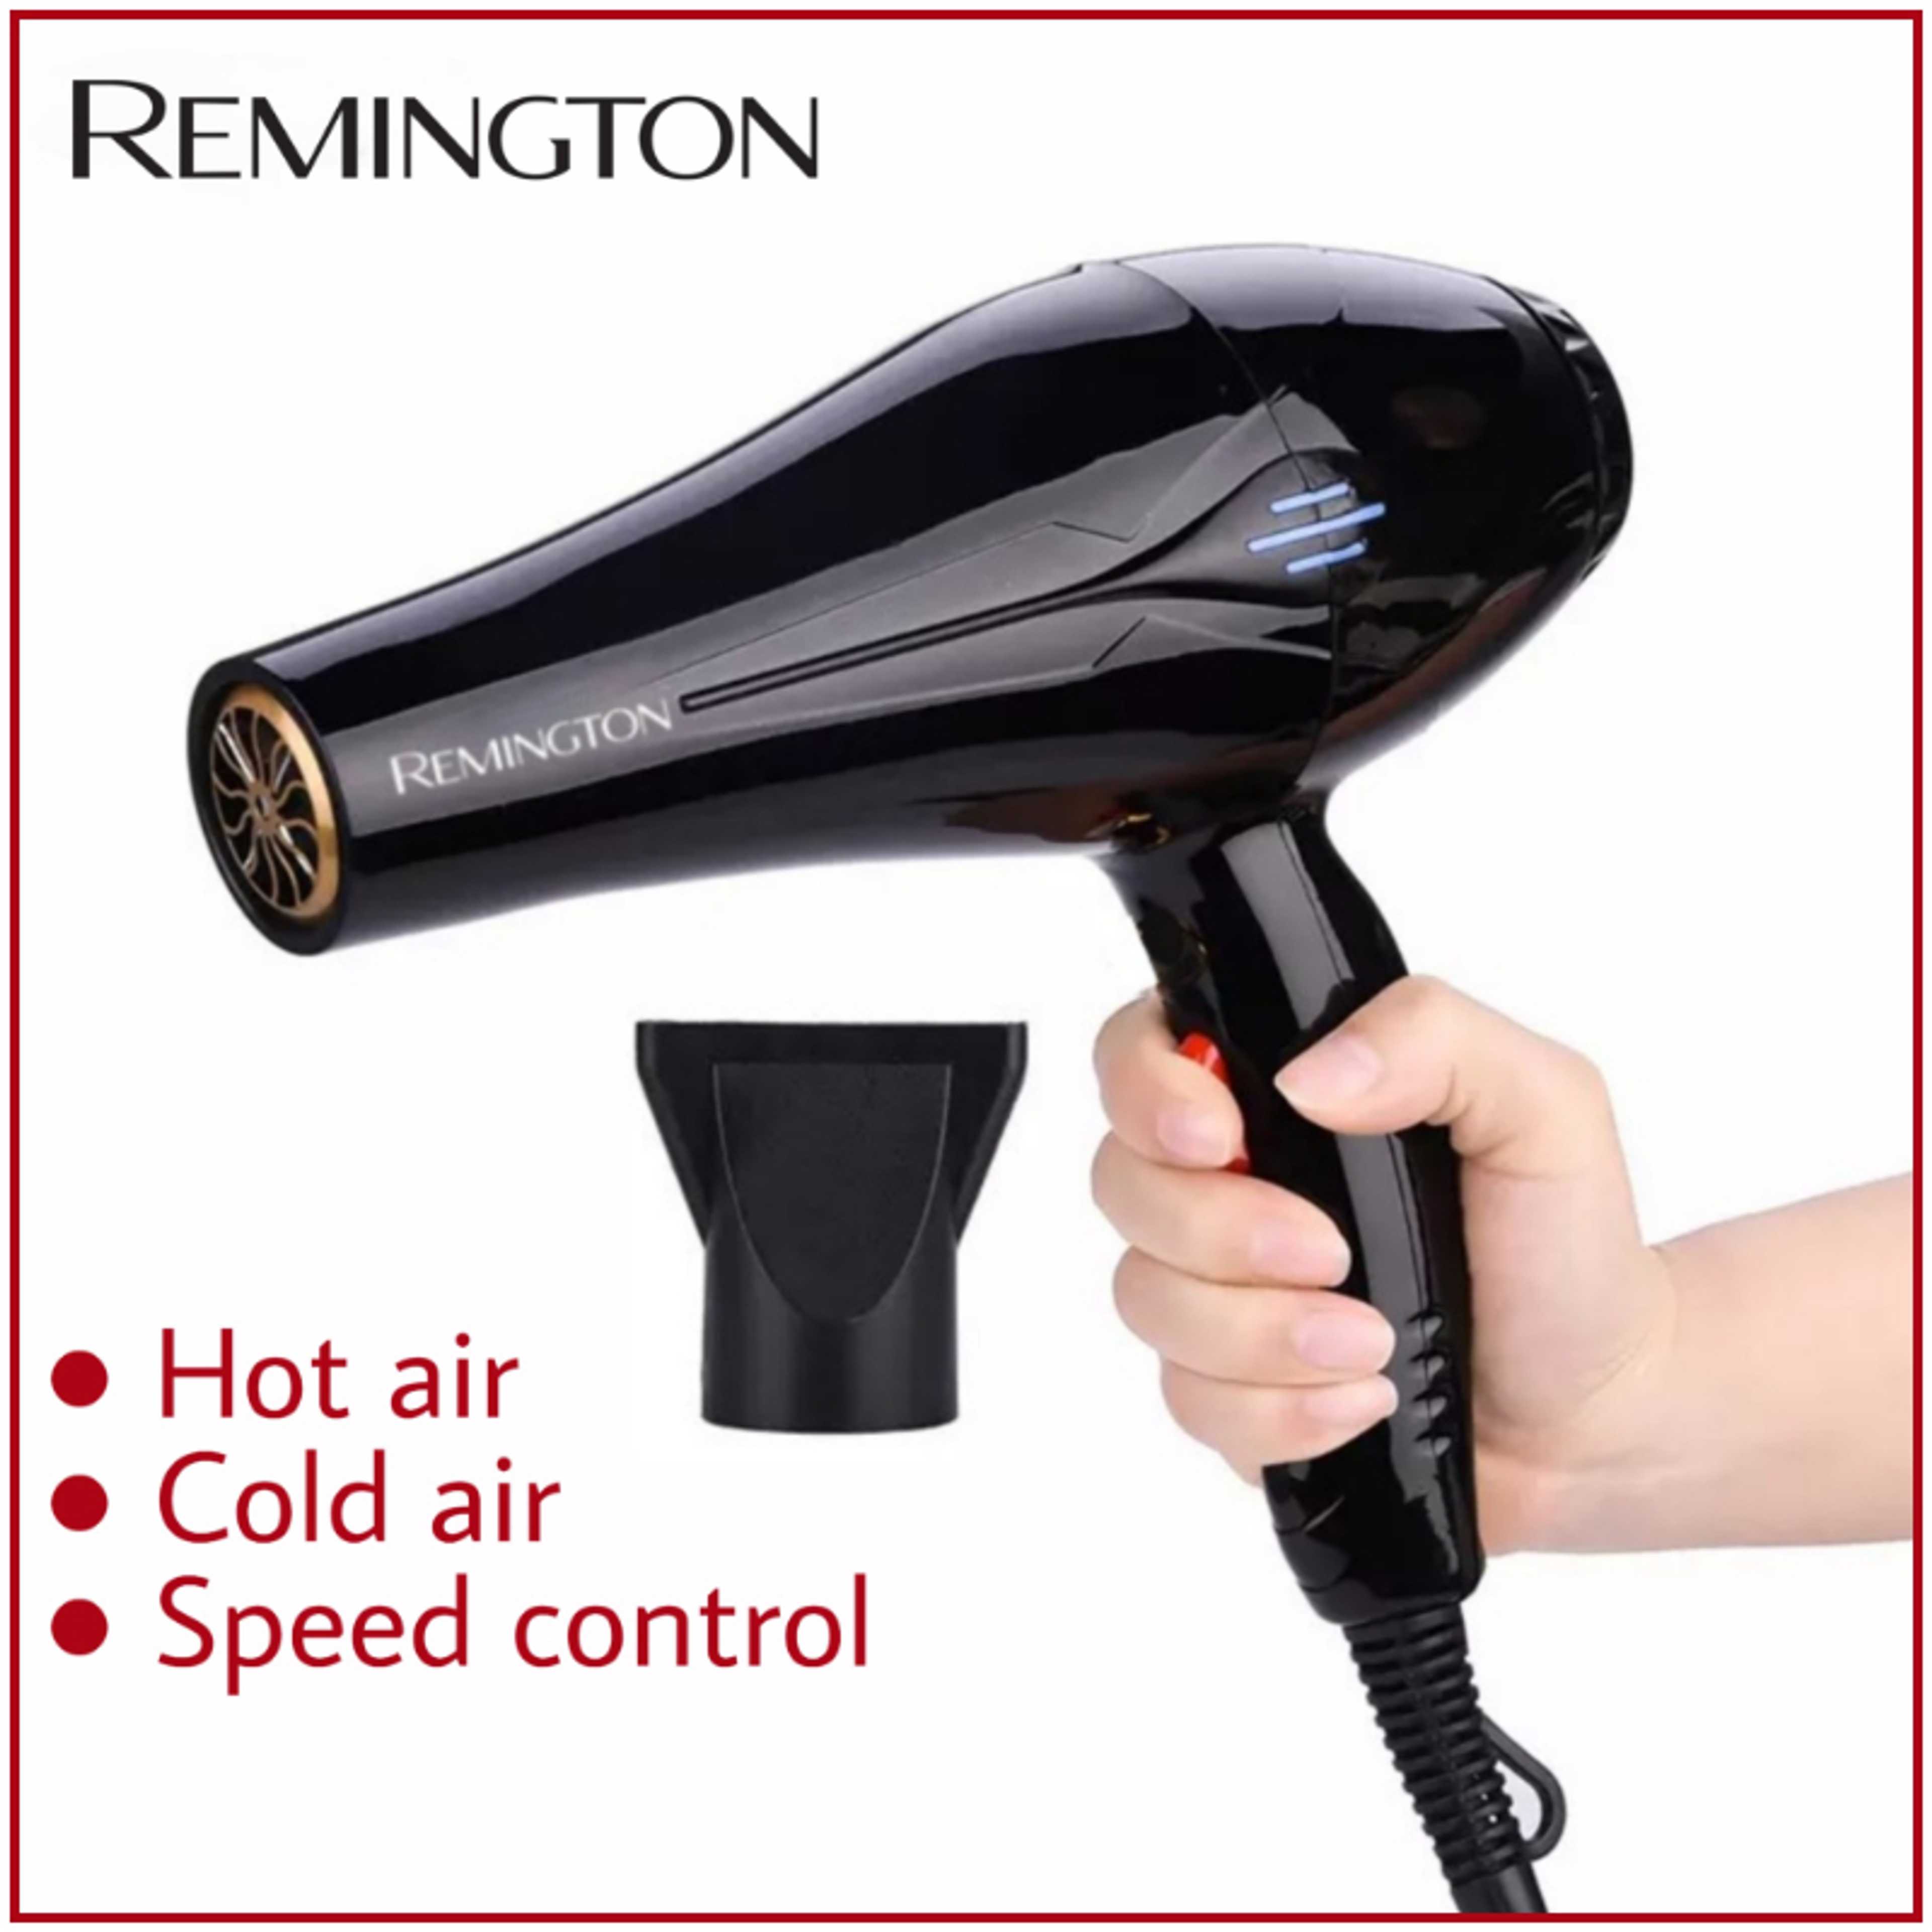 Original Hair Dryer for Girls and Boys 3 in 1 Cold, Warm & Hot Air Blower Hair Multi-Styler,Original 3000W 220v professional hair dryer with negative ion hydrating fan light blue powerful electric hair dryer